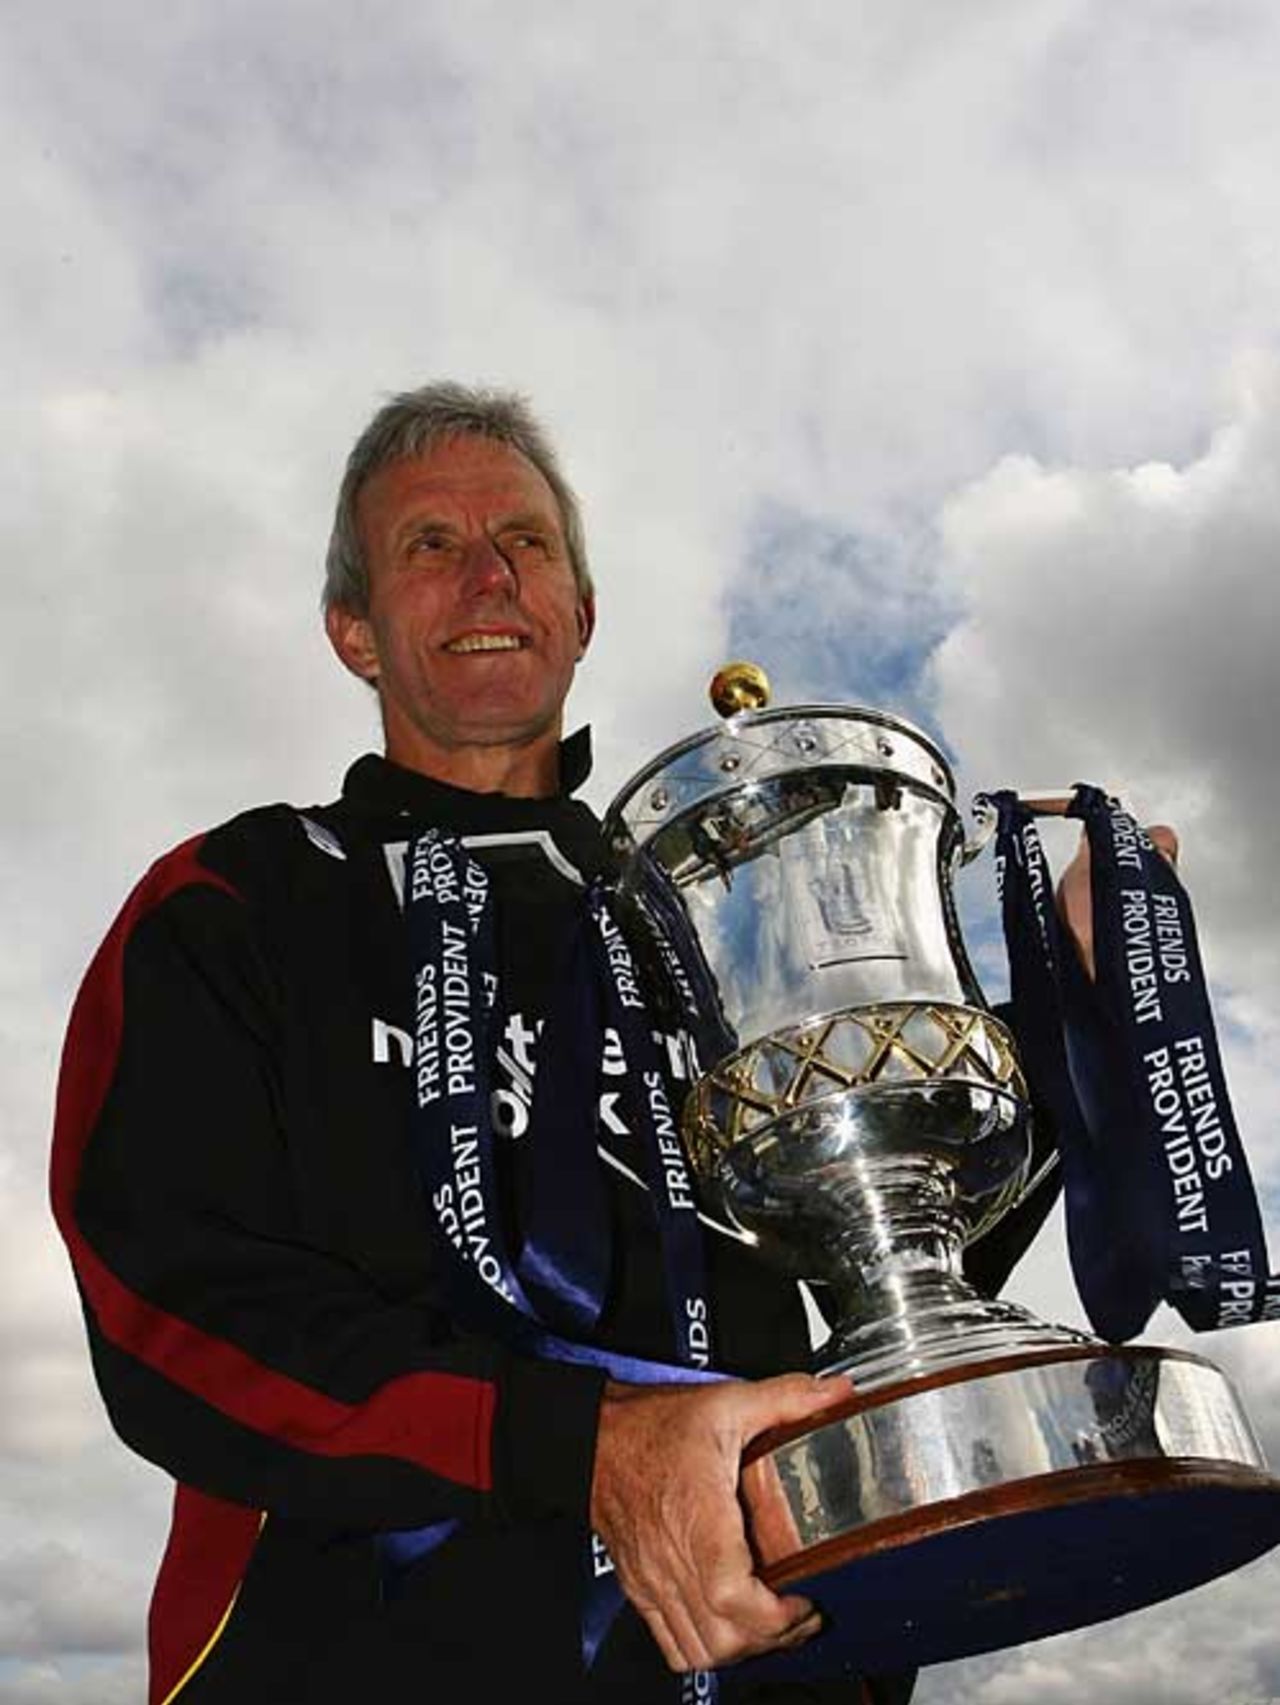 Geoff Cook with the Friends Provident Trophy, Chester-le-Street, April 14, 2008